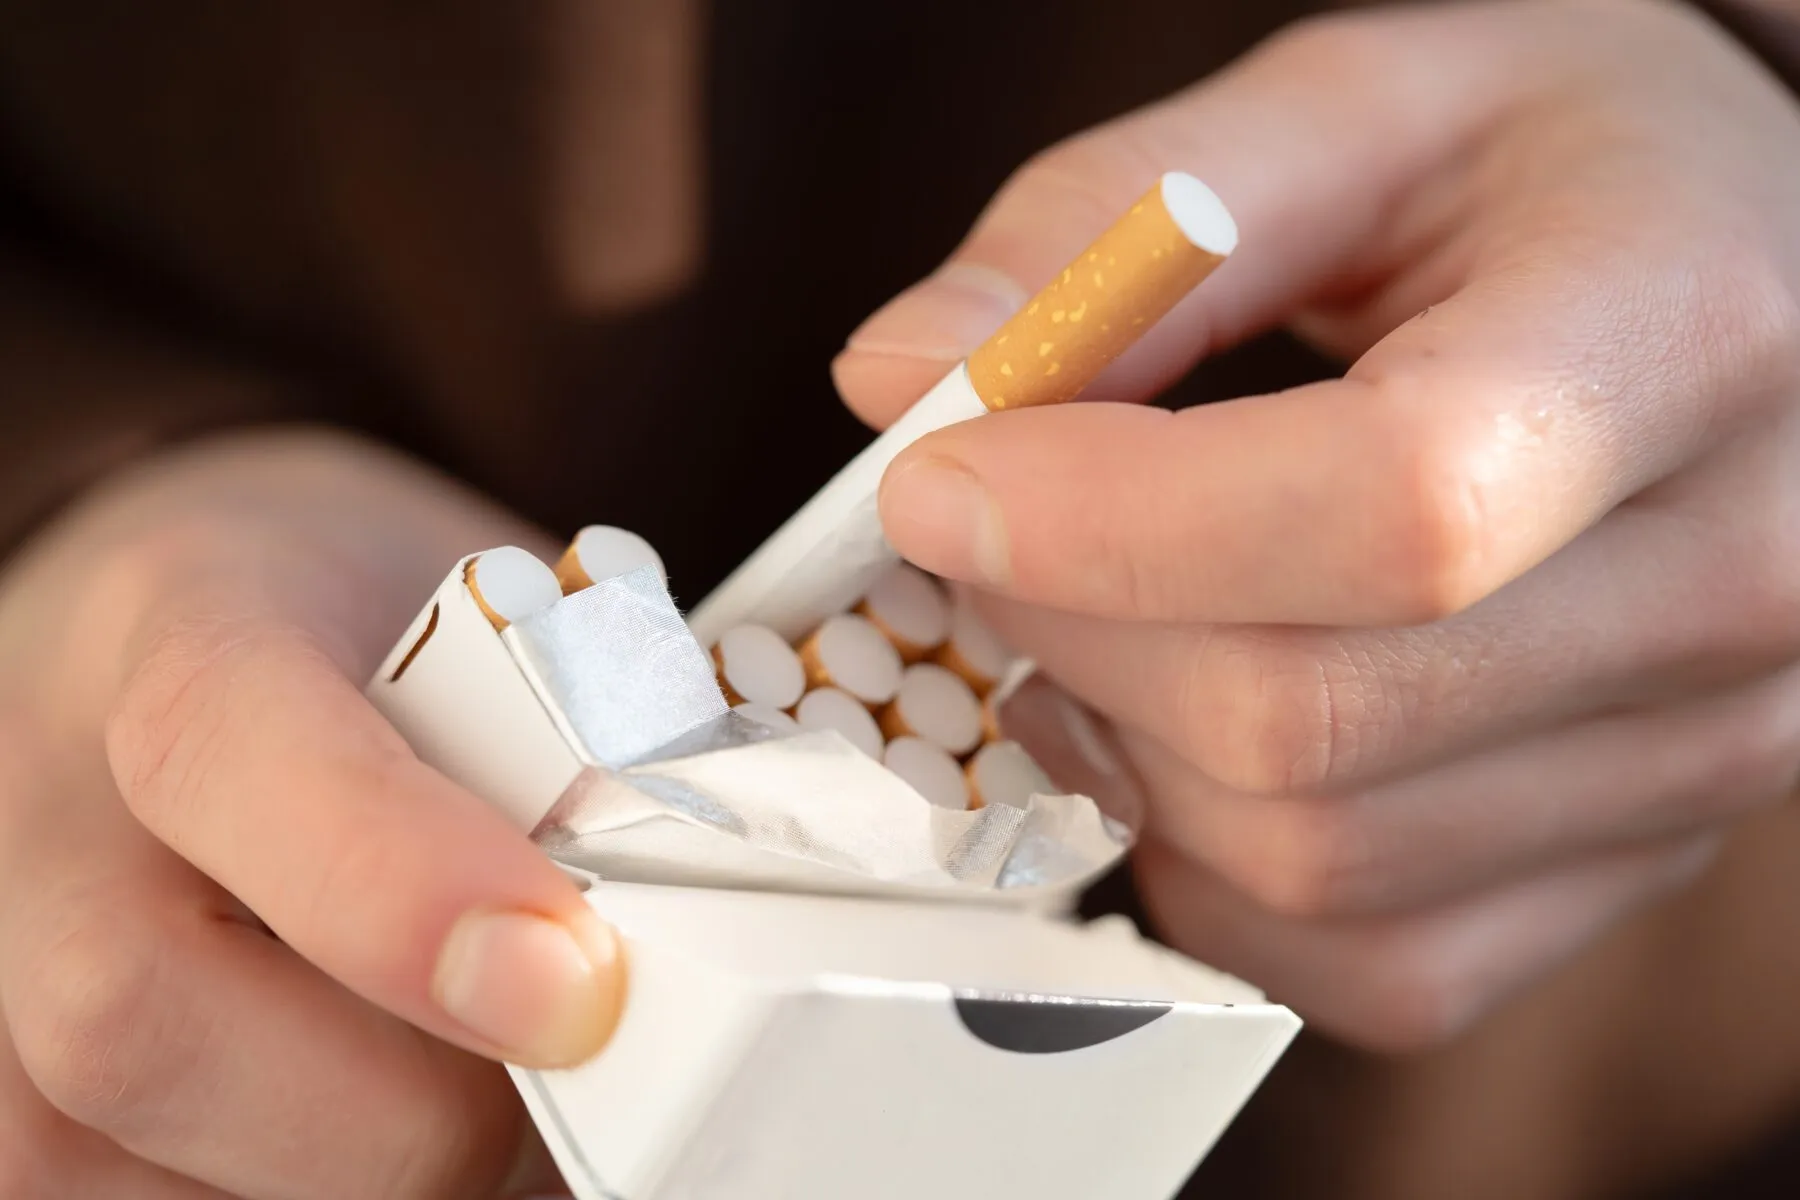 A cigarette being removed from a packet